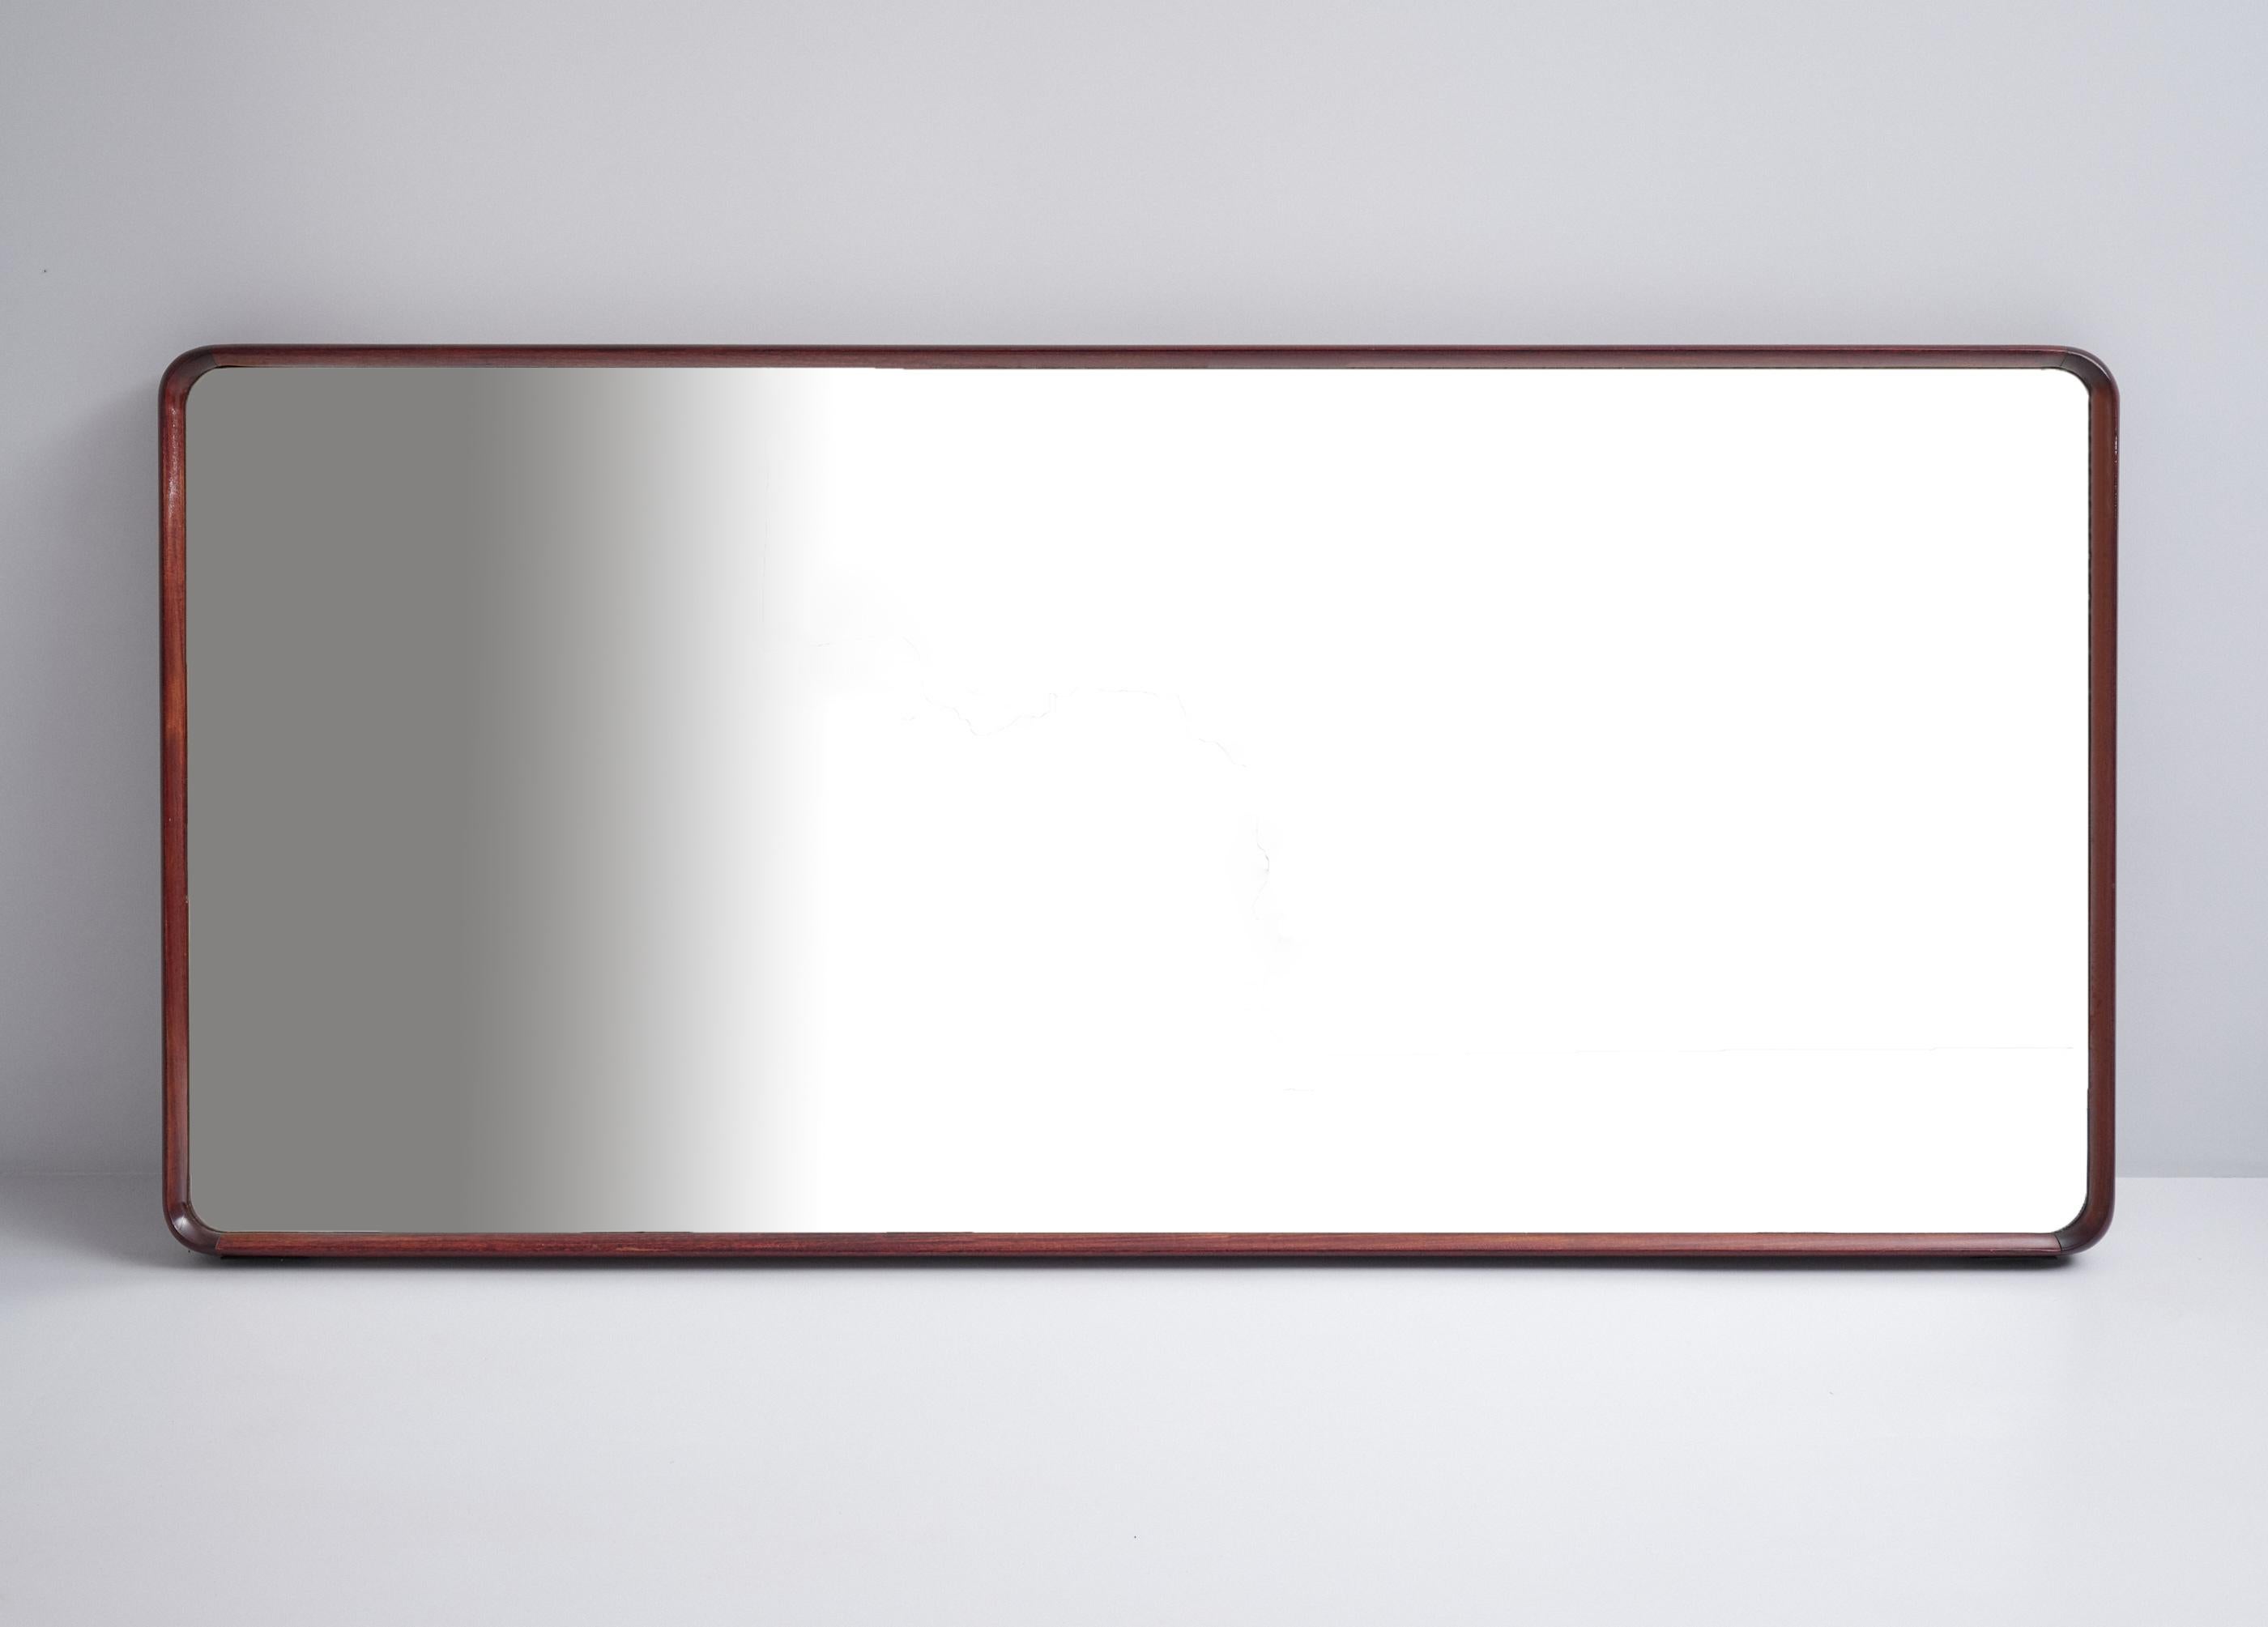 Large wall mirror of Italian production and design from the 1950s

Made of milled dark solid wood, with rounded frame

Elegant and modern, original patina, pleasant signs of aging on the mirrored glass.

This mirror can also be hung upright